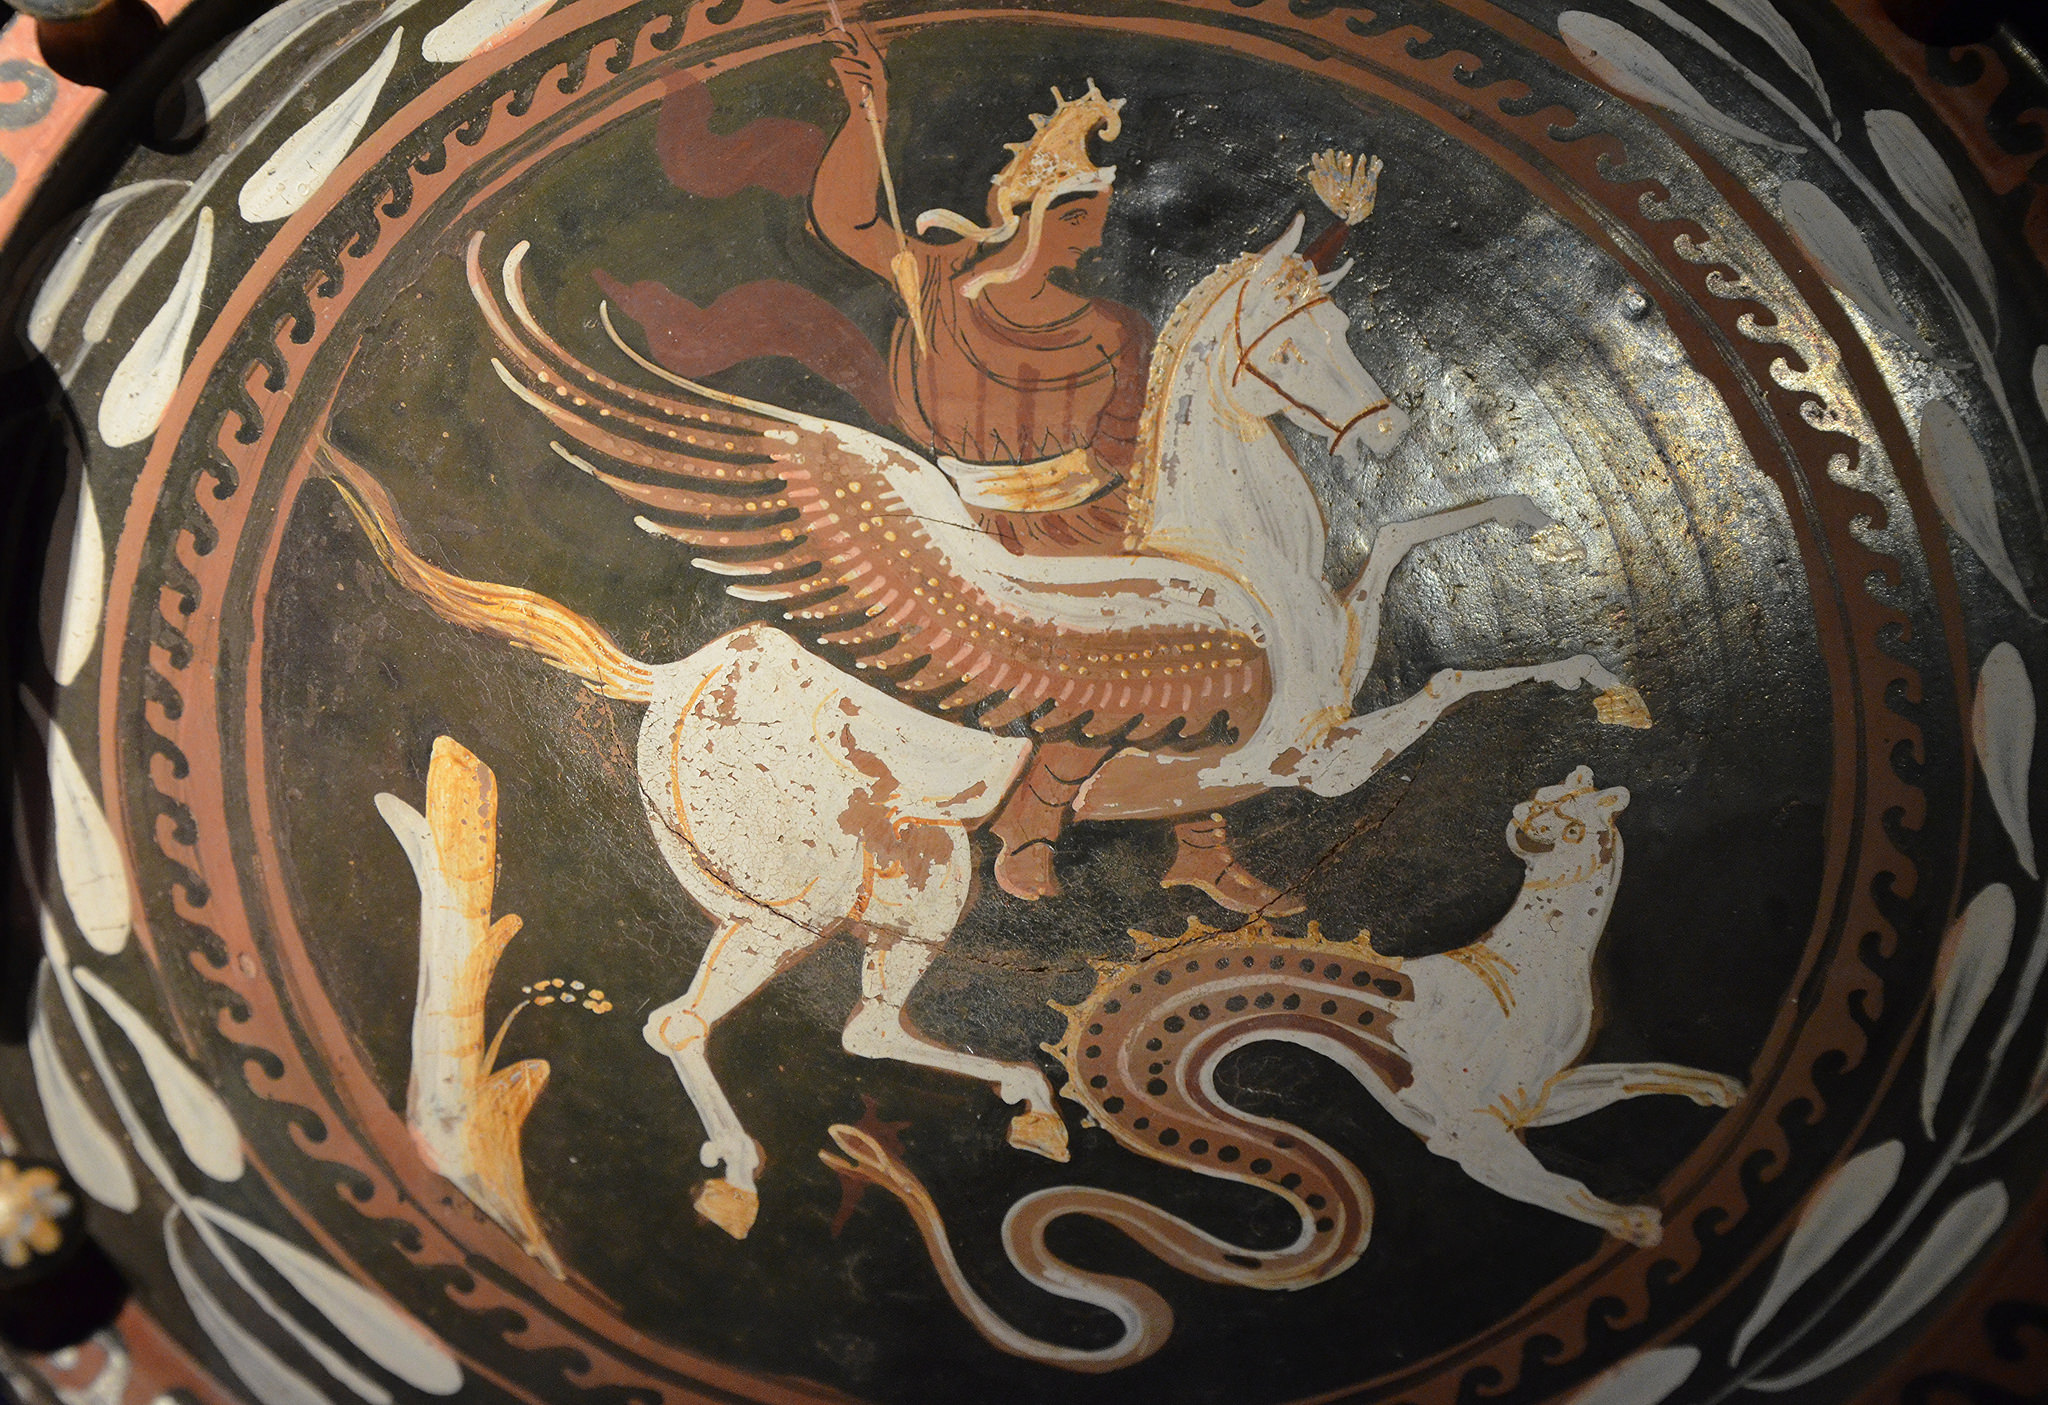 Constellation Pegasus Bellerophon defeats Chimera Copper Plated Alabaster Mythical Immortal Winged Divine Horse